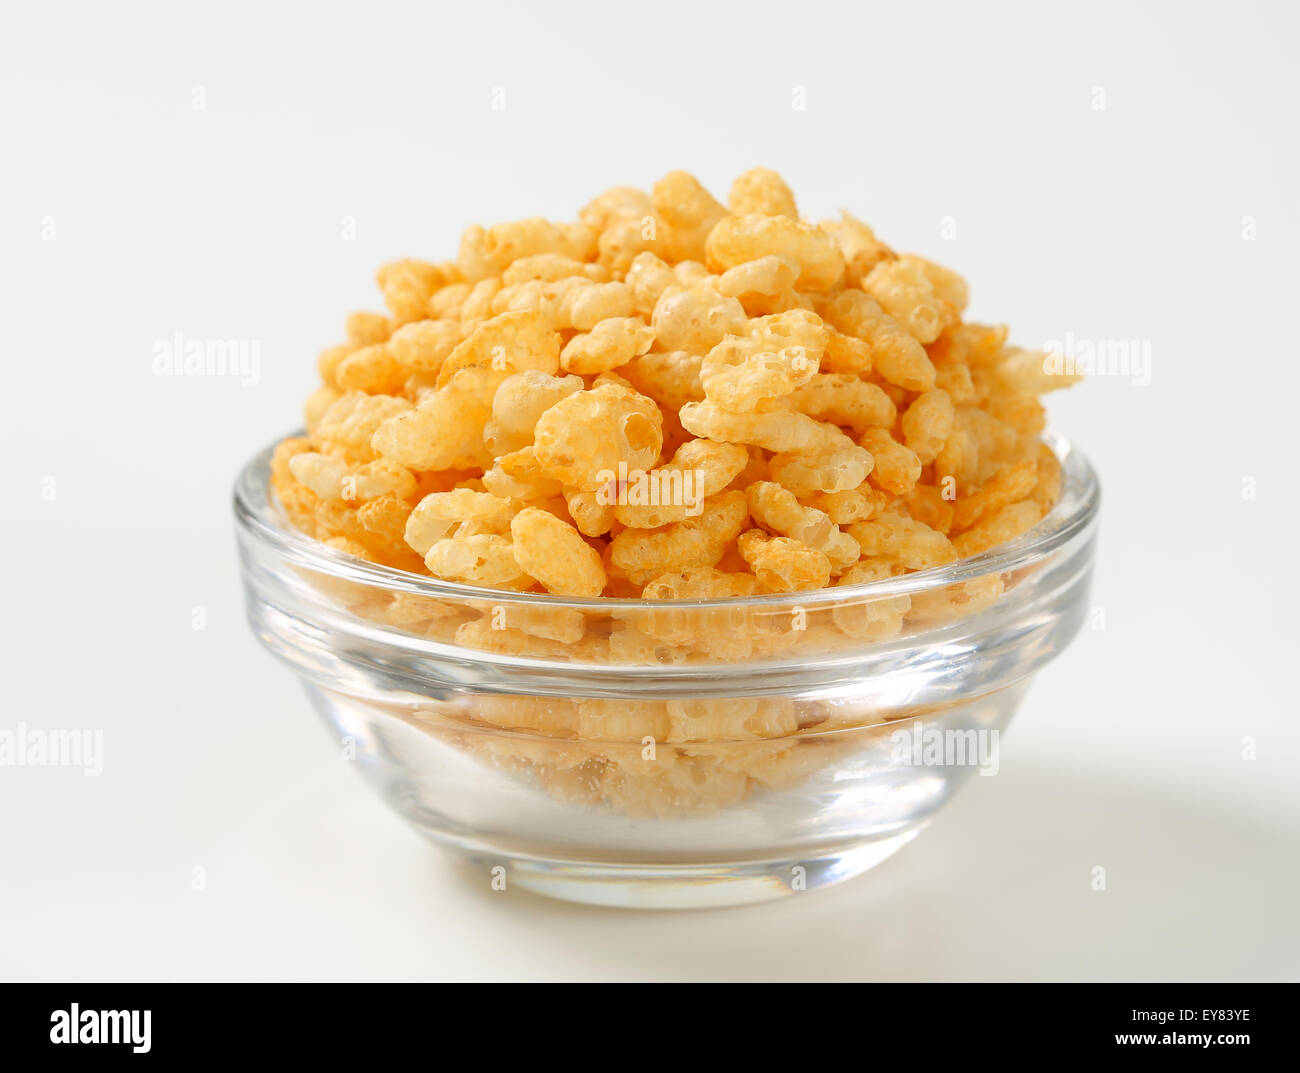 Bowl of toasted rice cereal Stock Photo